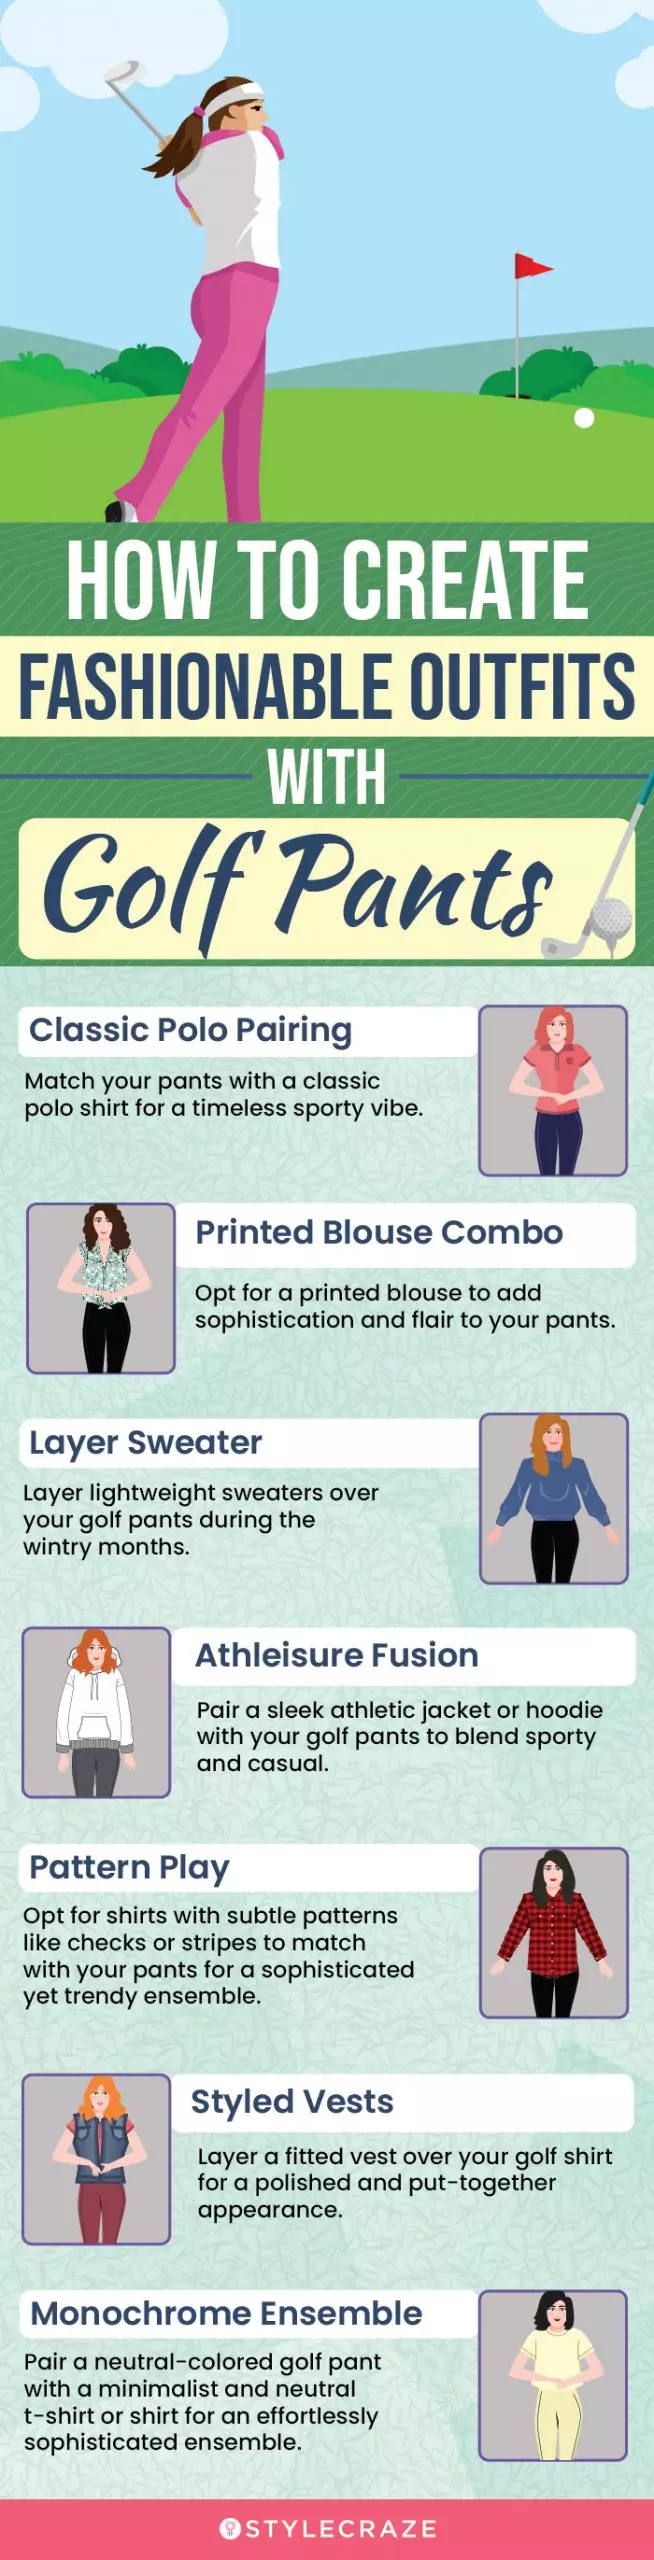 How To Create Fashionable Outfits With Golf Pants (infographic)